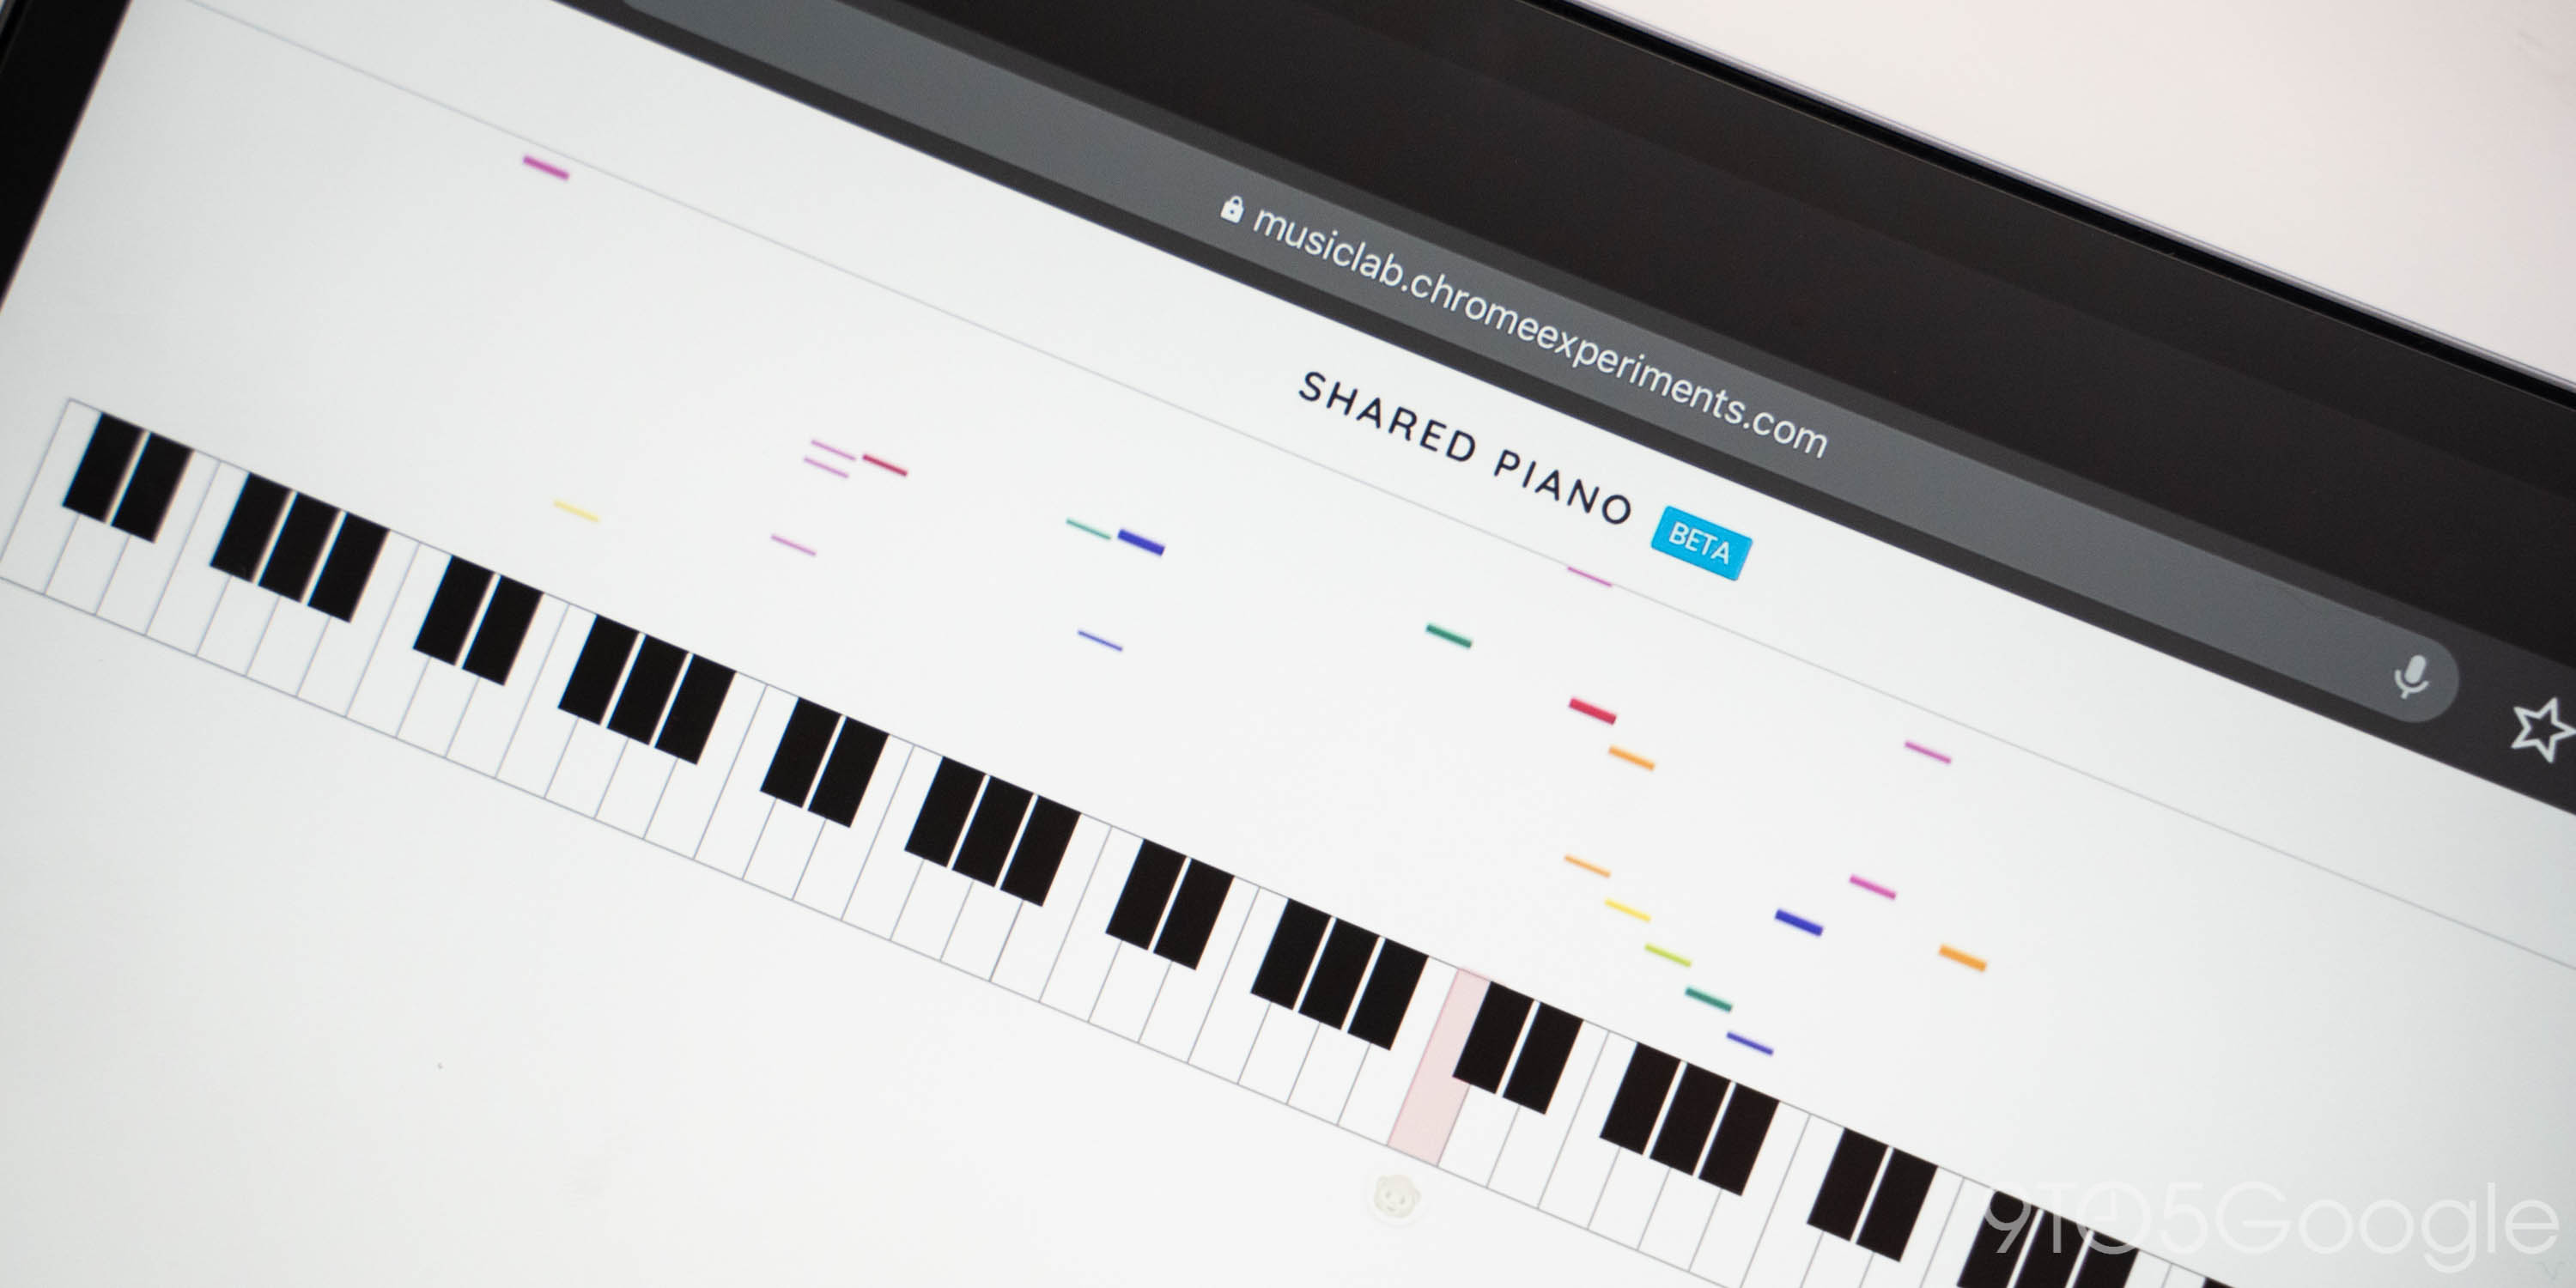 Google's 'Shared Piano' lets you create music w/ friends - 9to5Google